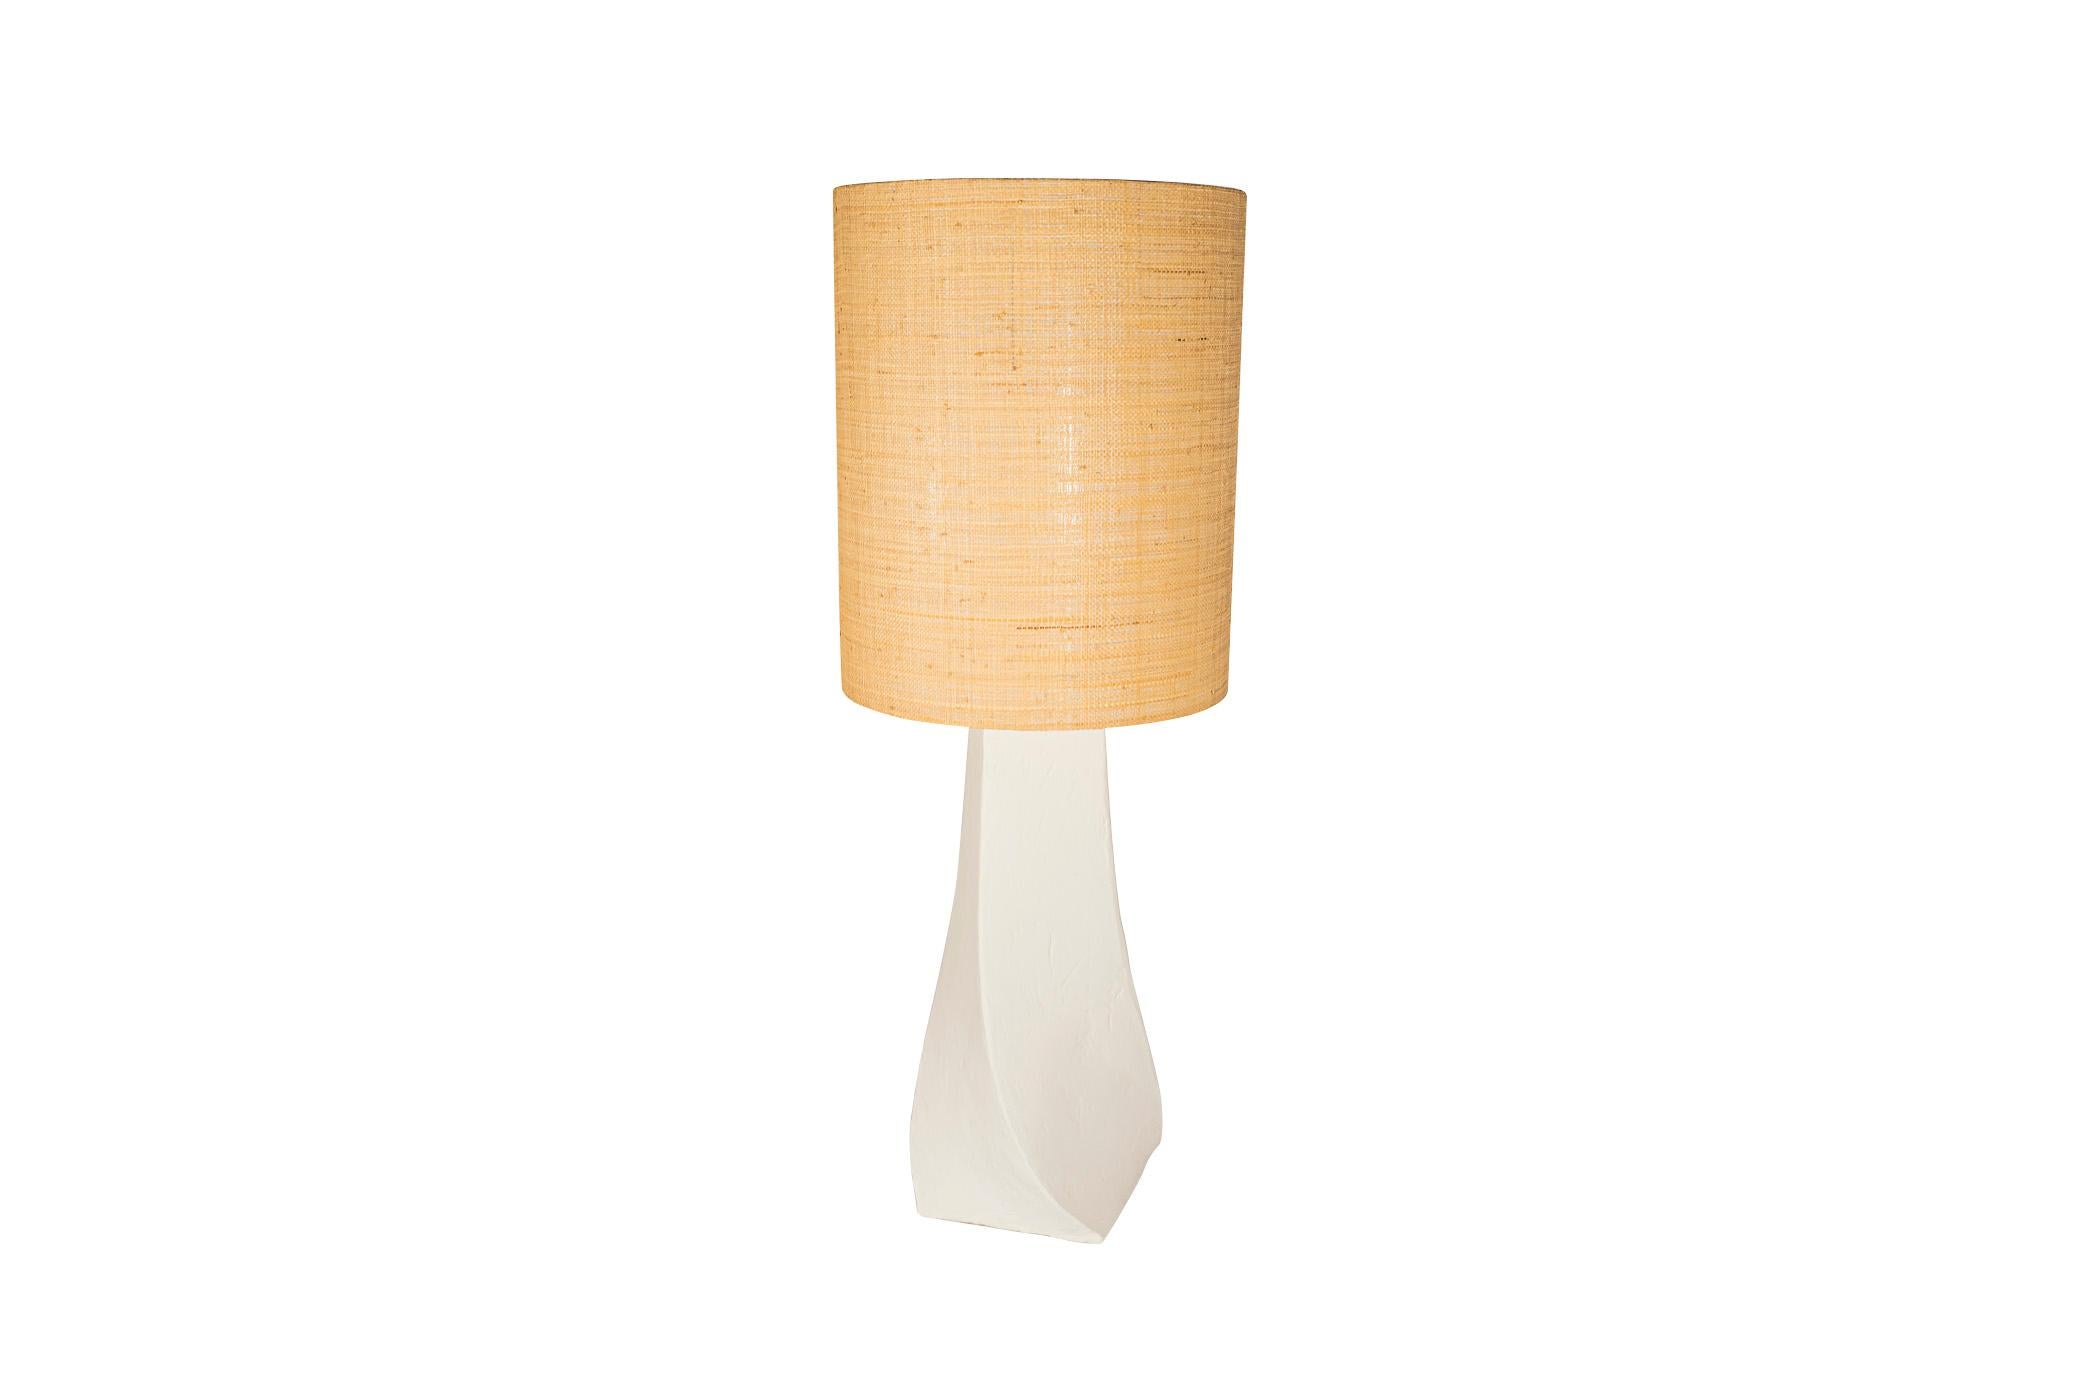 Pair of table lamps,
White plaster lamp feet with twisted decoration,
Rattan lampsdade,
France, circa 1970.

Measures: Height 112 cm, diameter 42 cm.